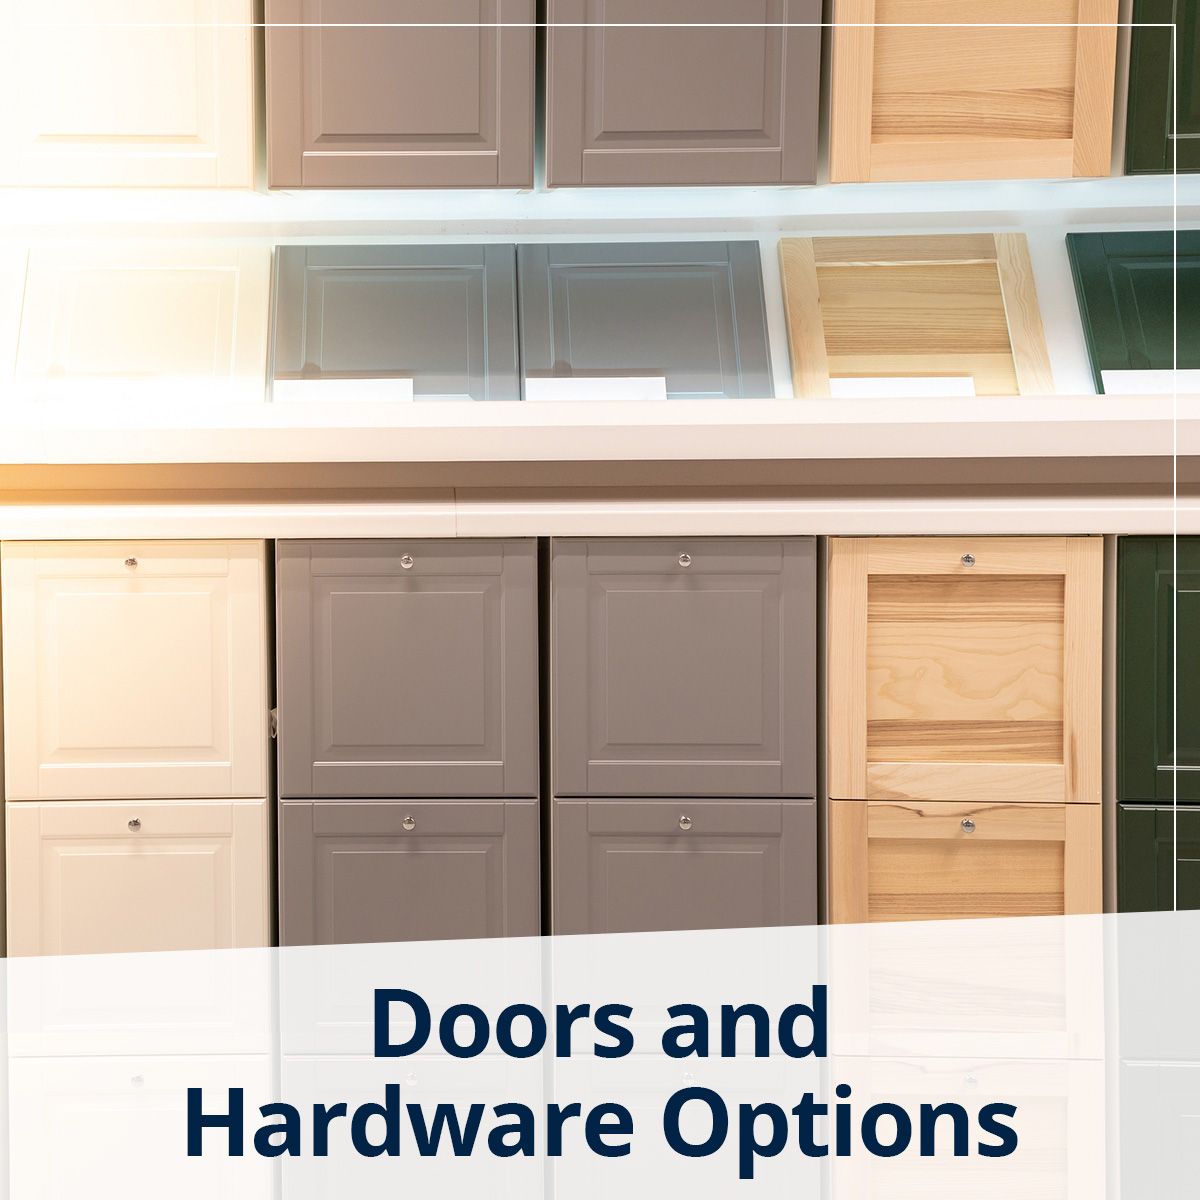 Doors and Hardware Options